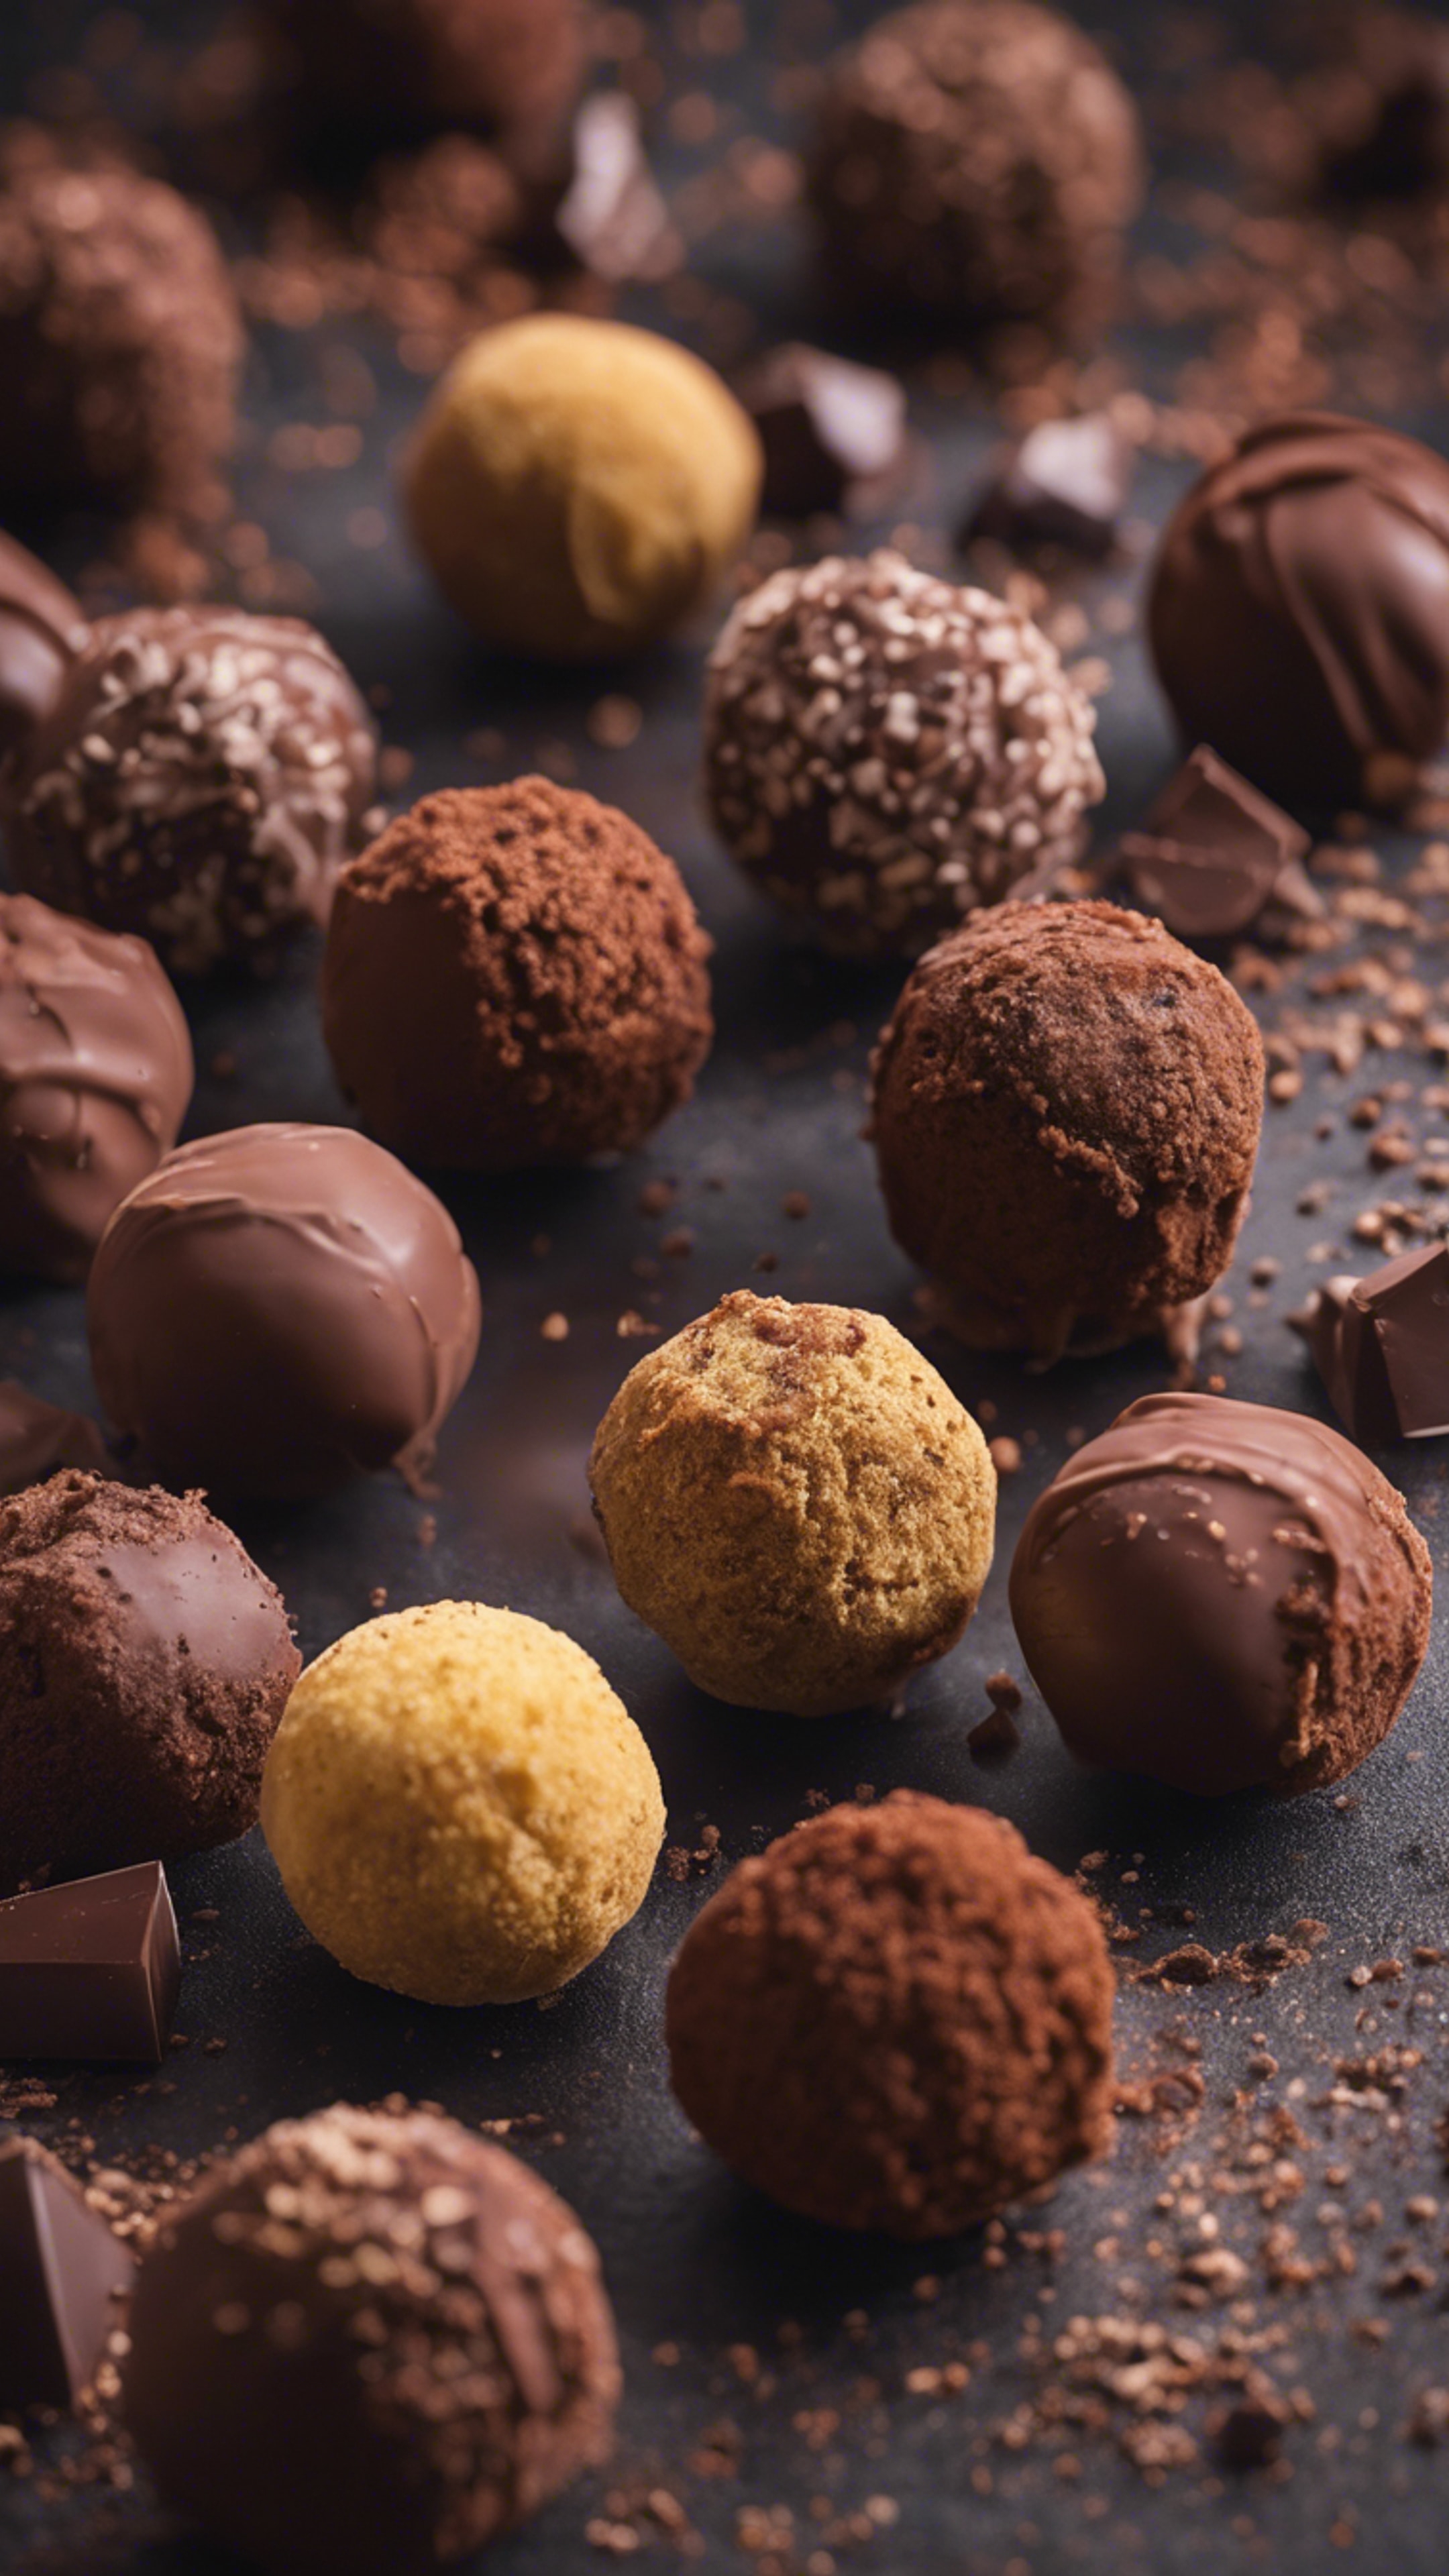 An assortment of delicious, delectable brown chocolate truffles Tapet[070a36241272450fb9f4]